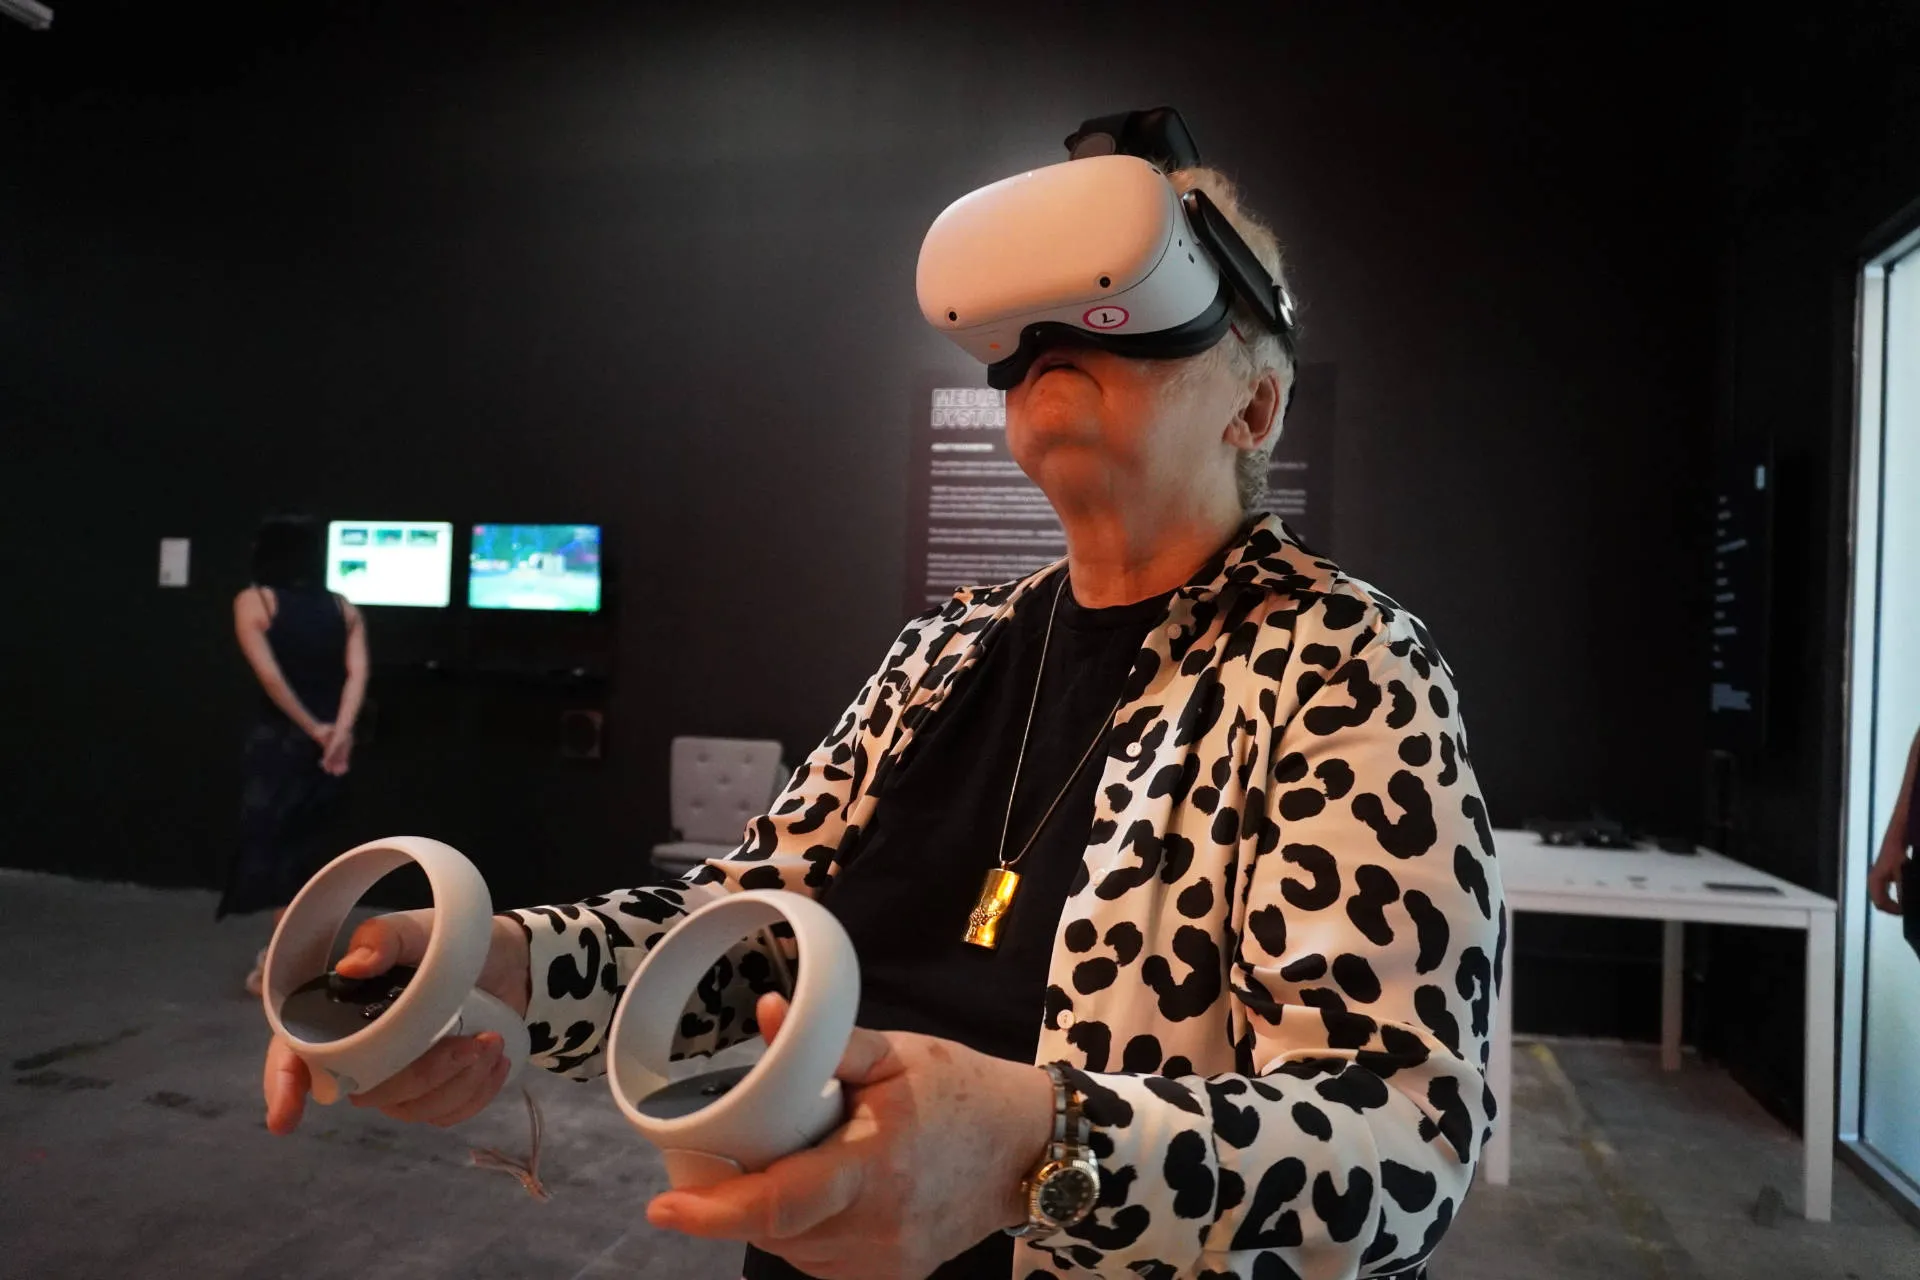 A person using a Oculus VR headset at the MUD exhibition, inmersed in virtual reality